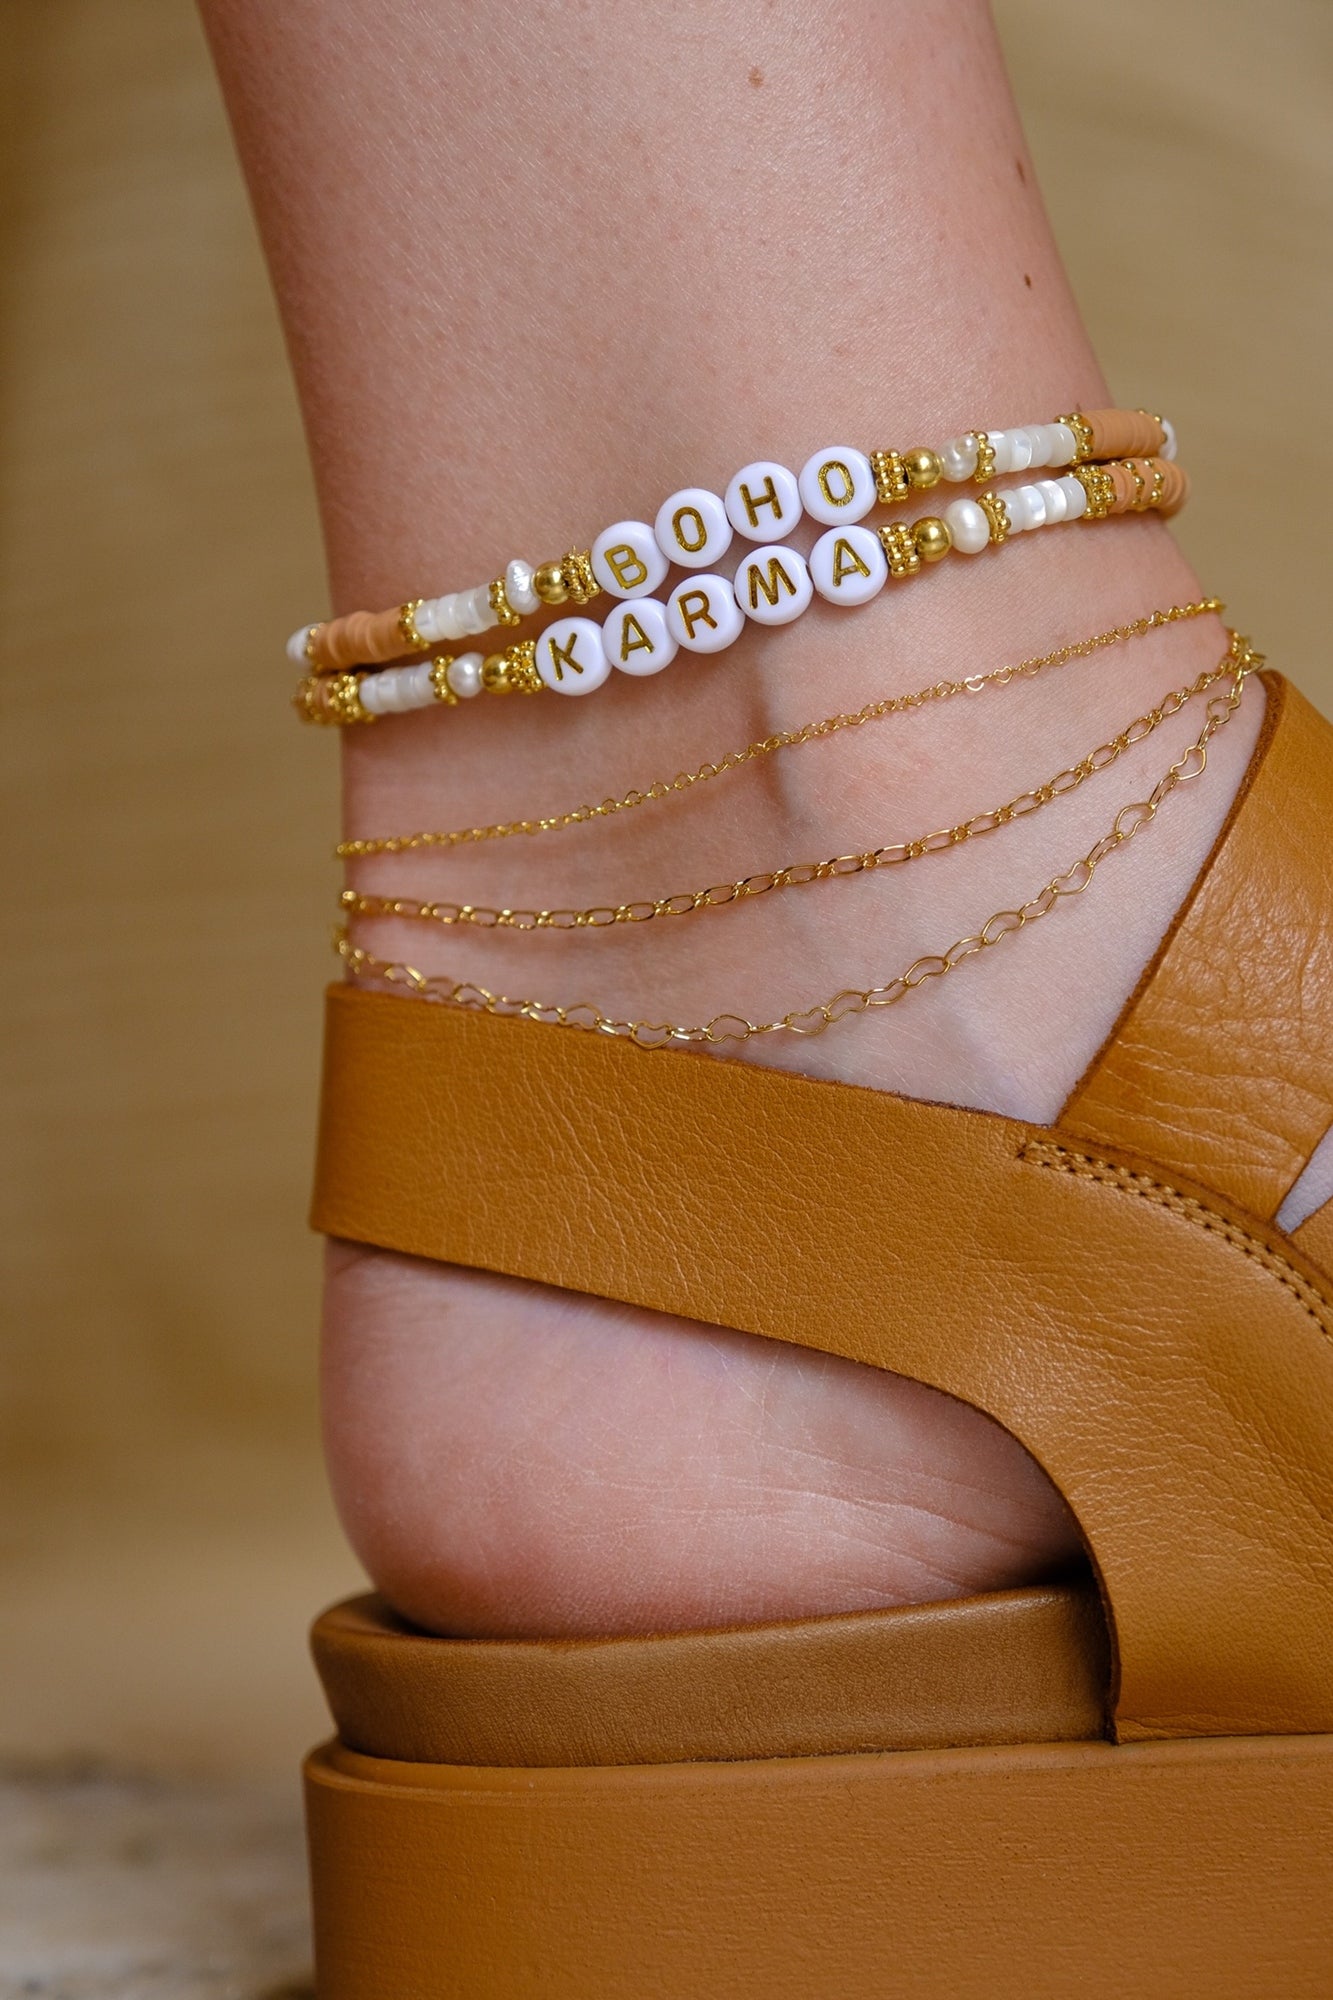 Two-tone “Marjorie” ankle chain (your choice)